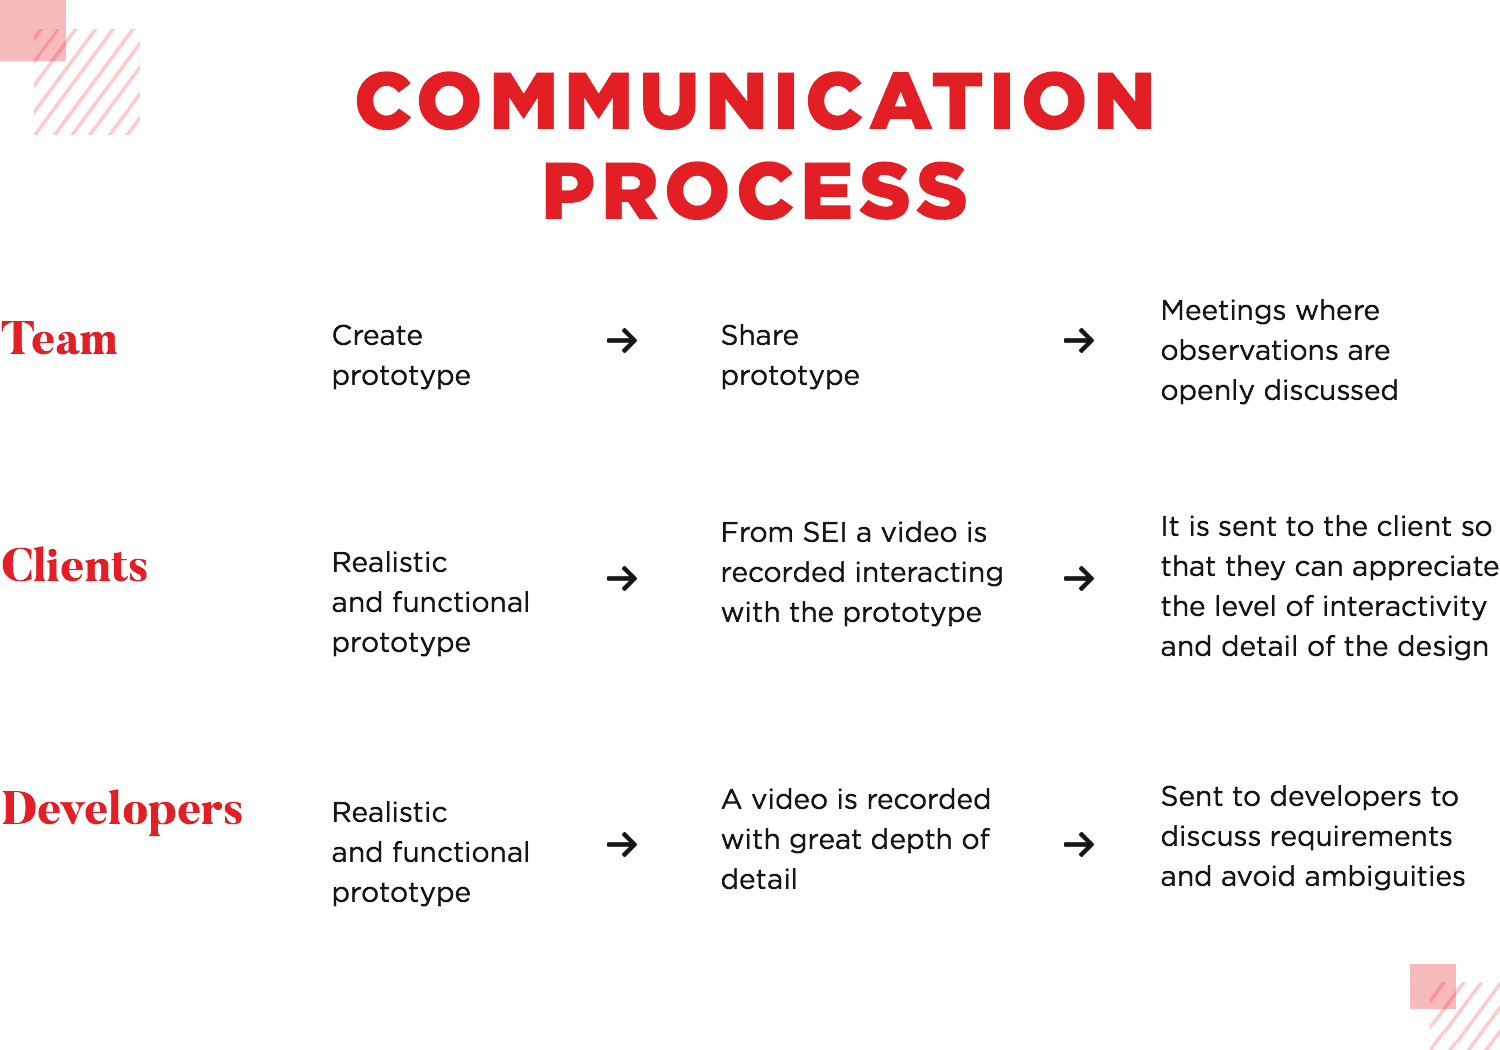 how SEI uses prototypes in their communication process